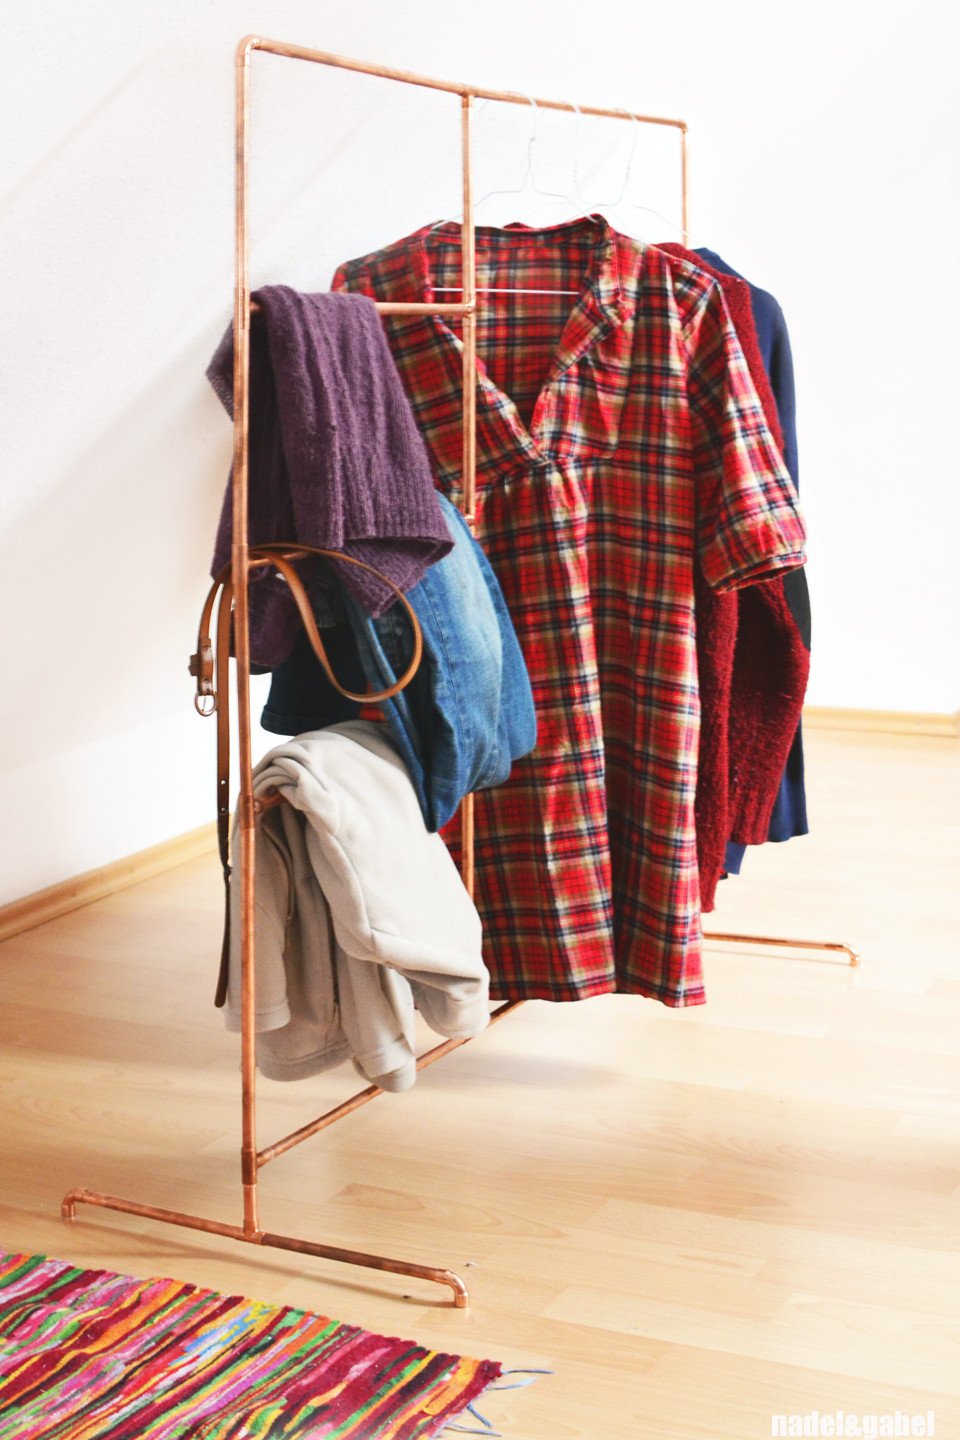 Pipe Clothes Rack DIY
 Copper – DIY clothes rack from copper pipes